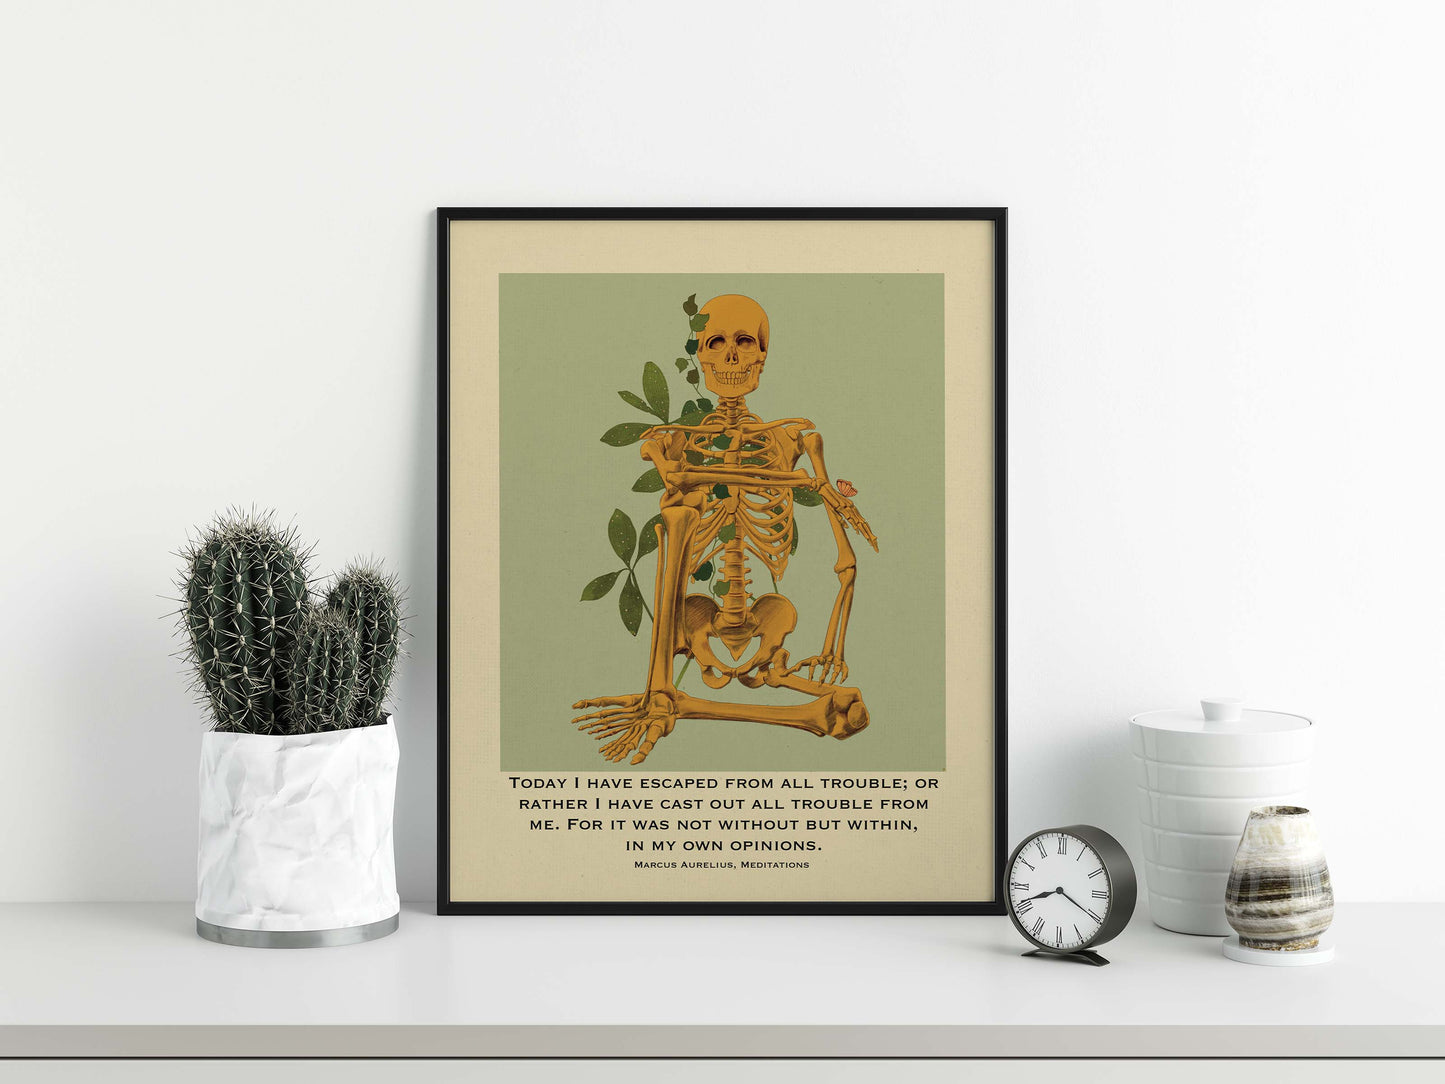 Marcus Aurelius Print and  skeleton sitting in happy pose in yellow color with green & beige background poster displayed in black frame